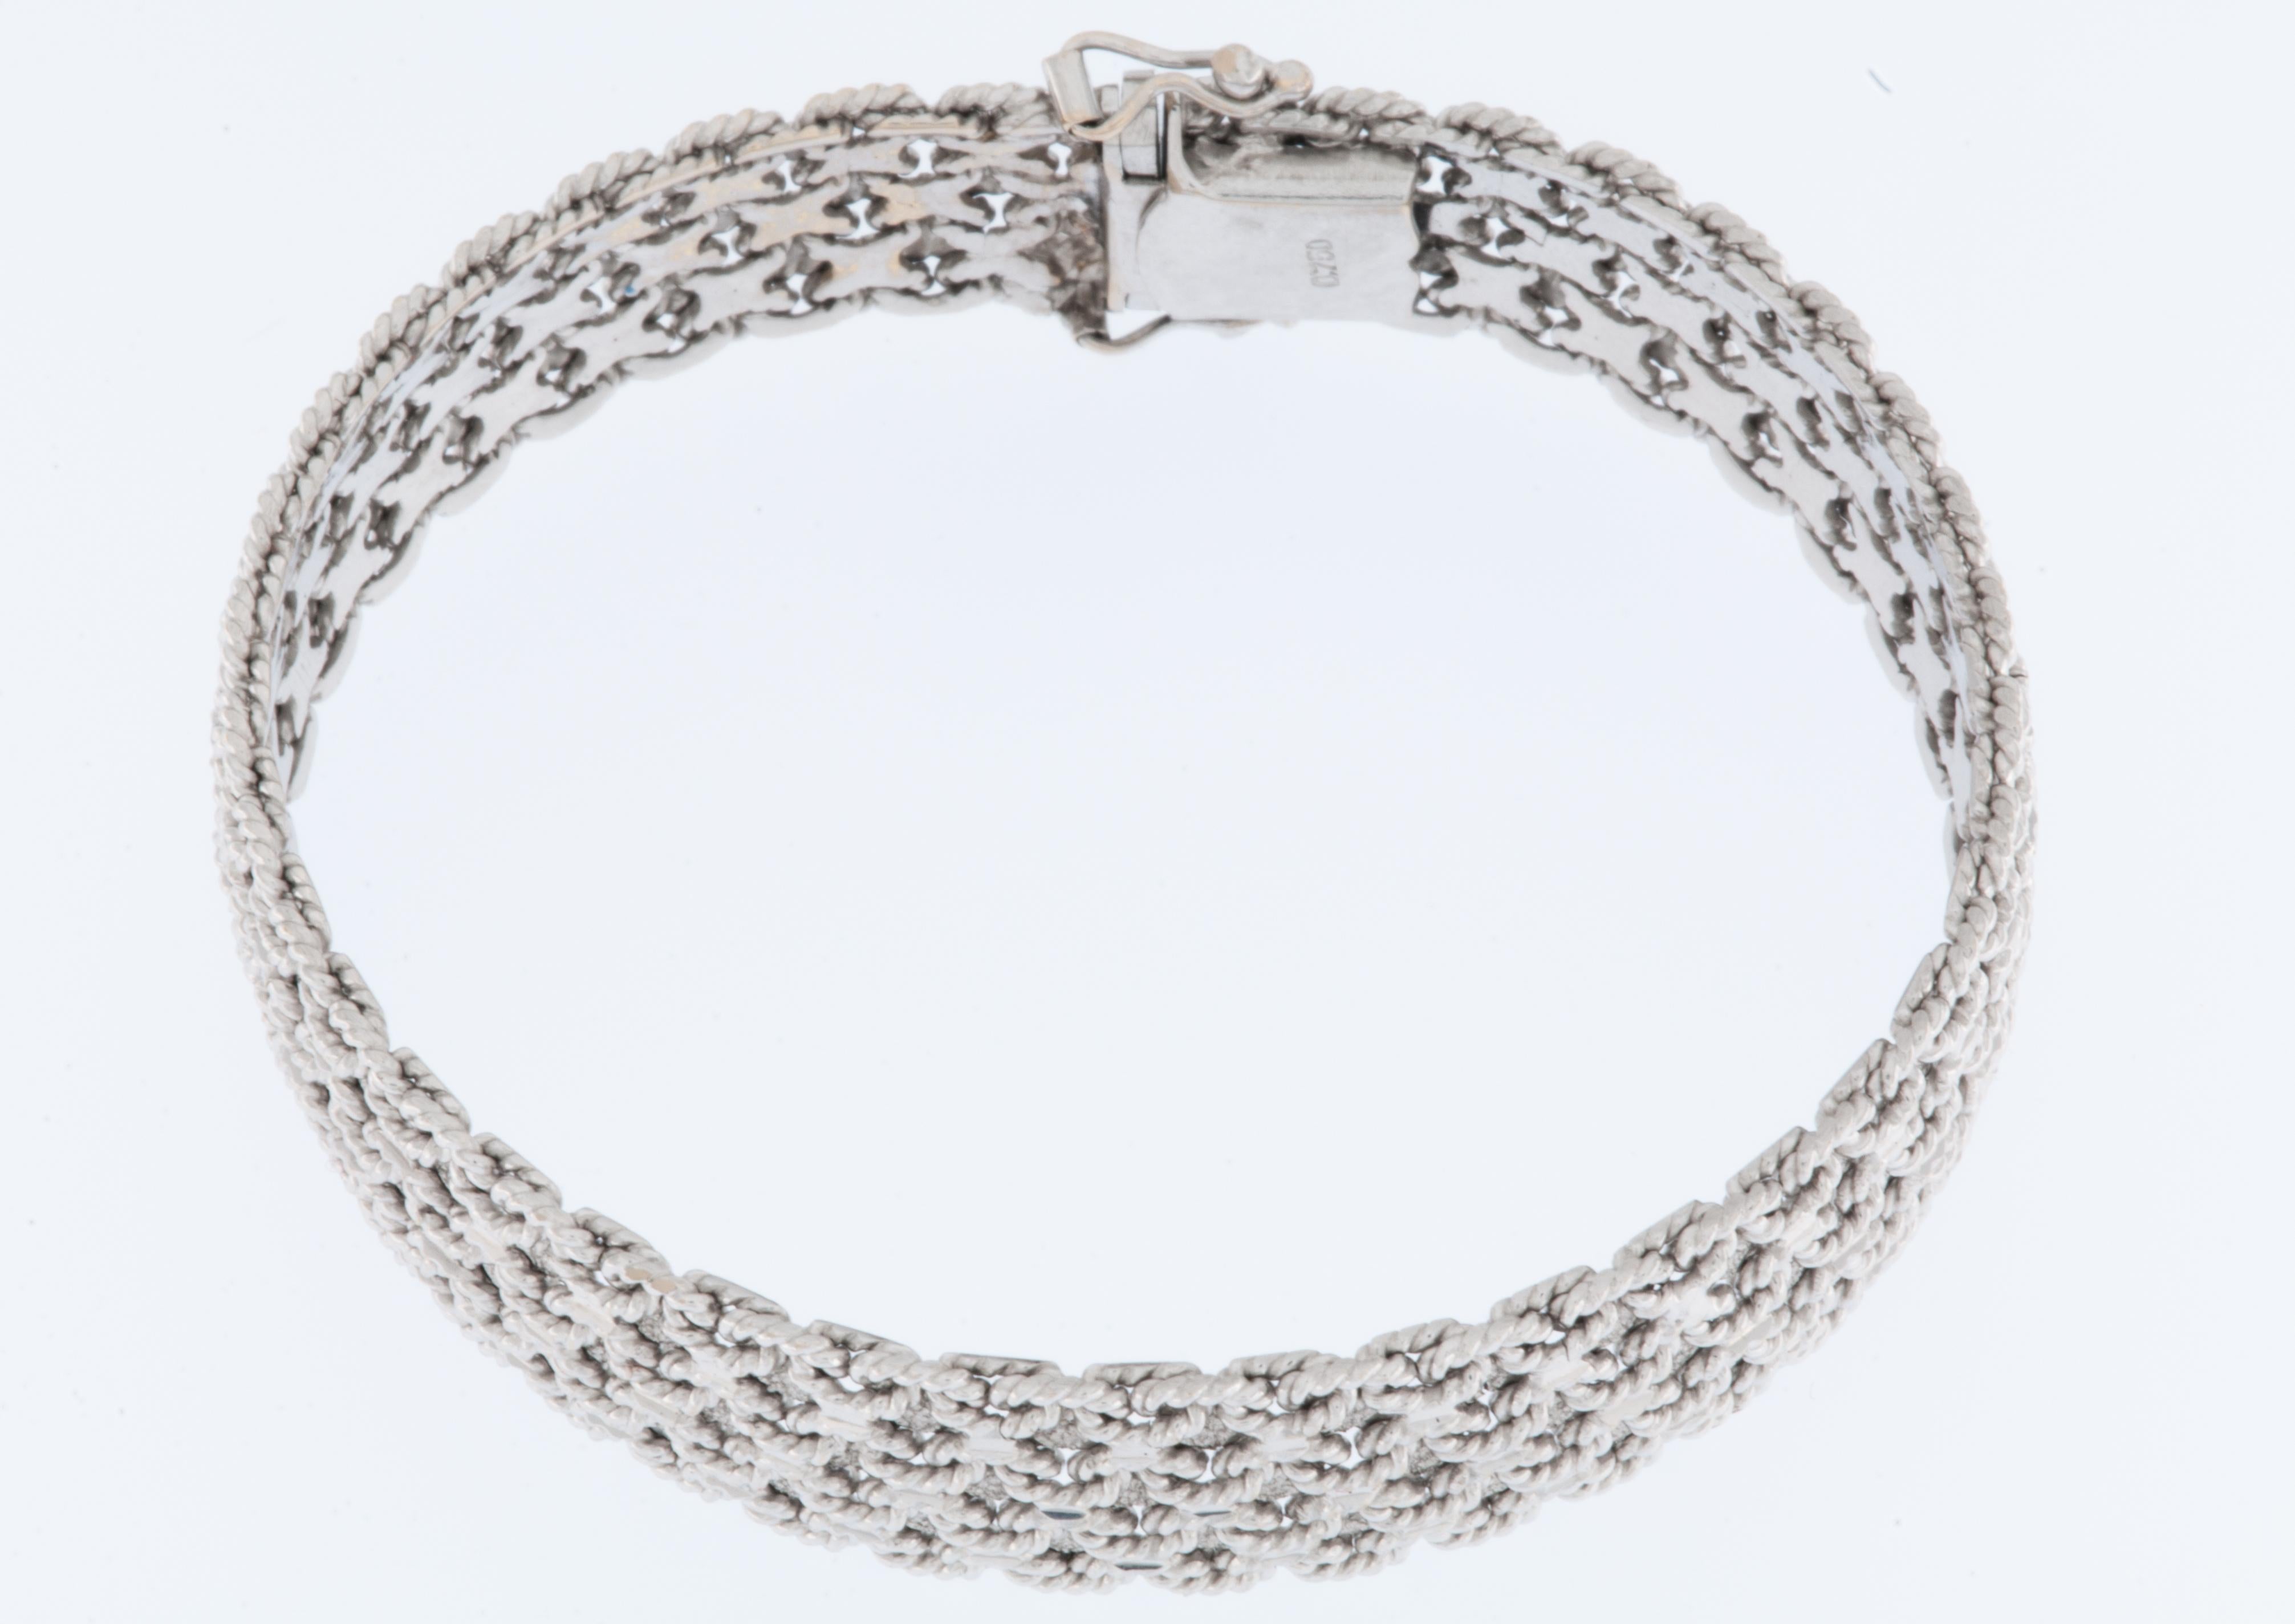 The Vintage French 18kt White Gold Bracelet is a stunning and intricate piece of jewelry. 

The bracelet is crafted from 18kt white gold, which is known for its durability and elegant appearance. White gold is a popular choice for fine jewelry due